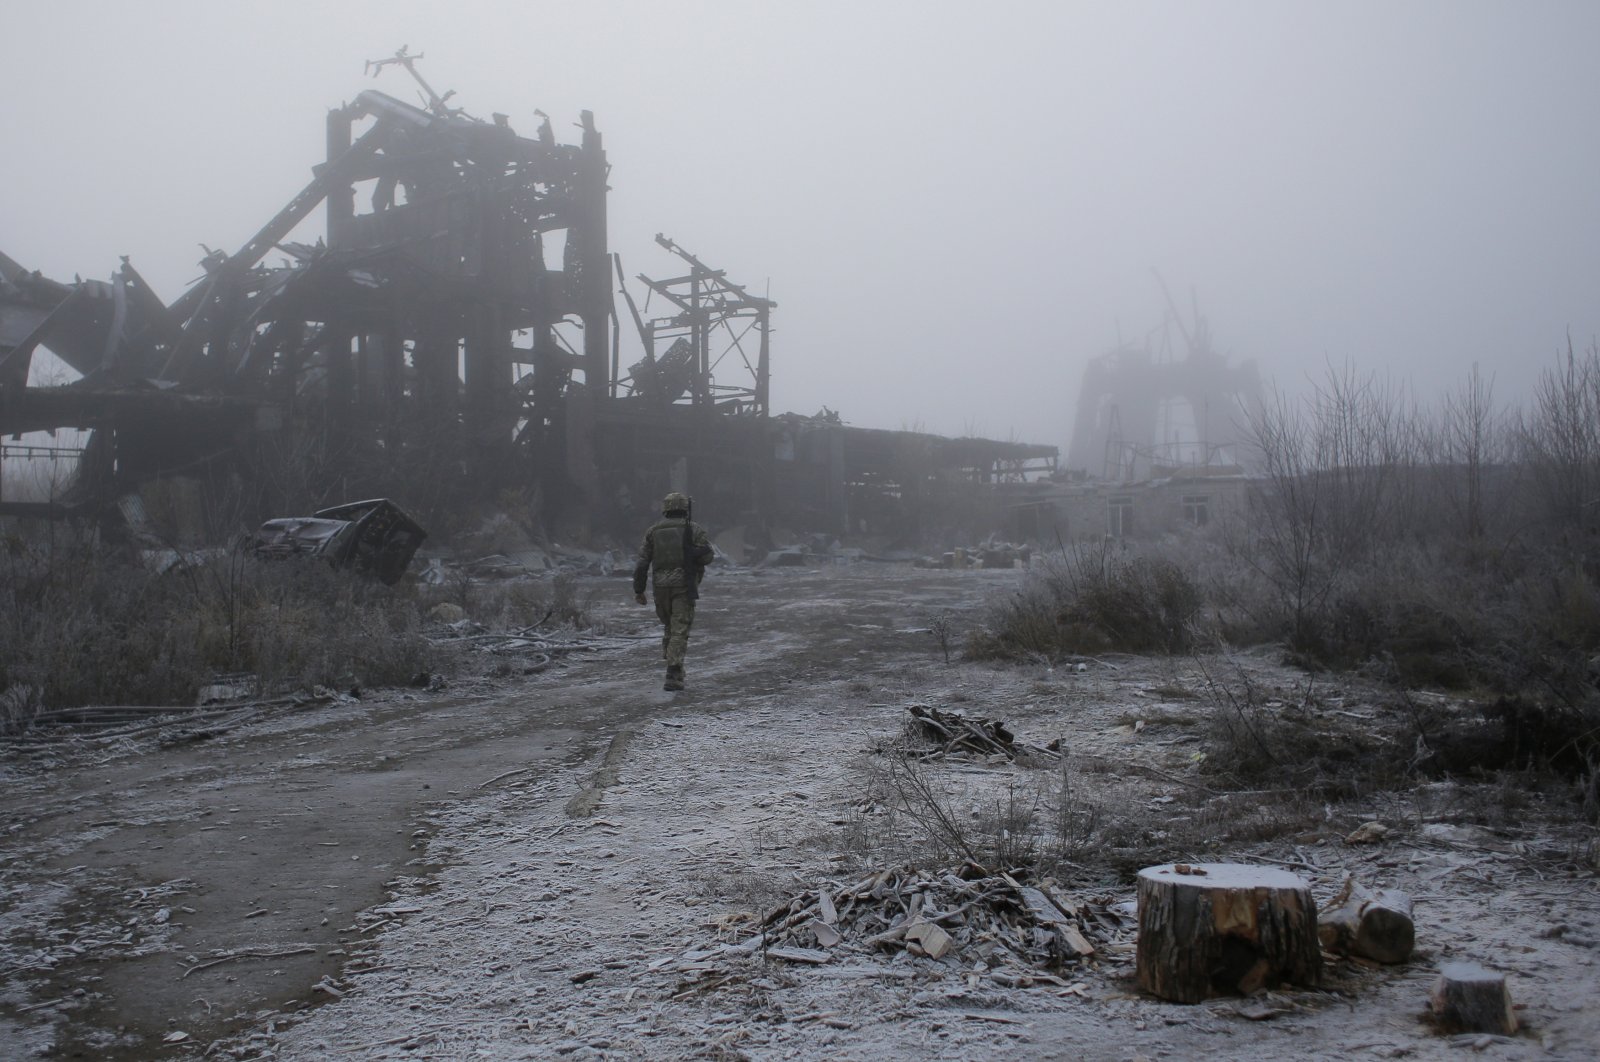 Ukrainian soldier passes by a destroyed Butovka coal mine as he approaches his front line position in the town of Avdiivka in the Donetsk region, Ukraine, Nov. 19, 2019. (AP Photo)